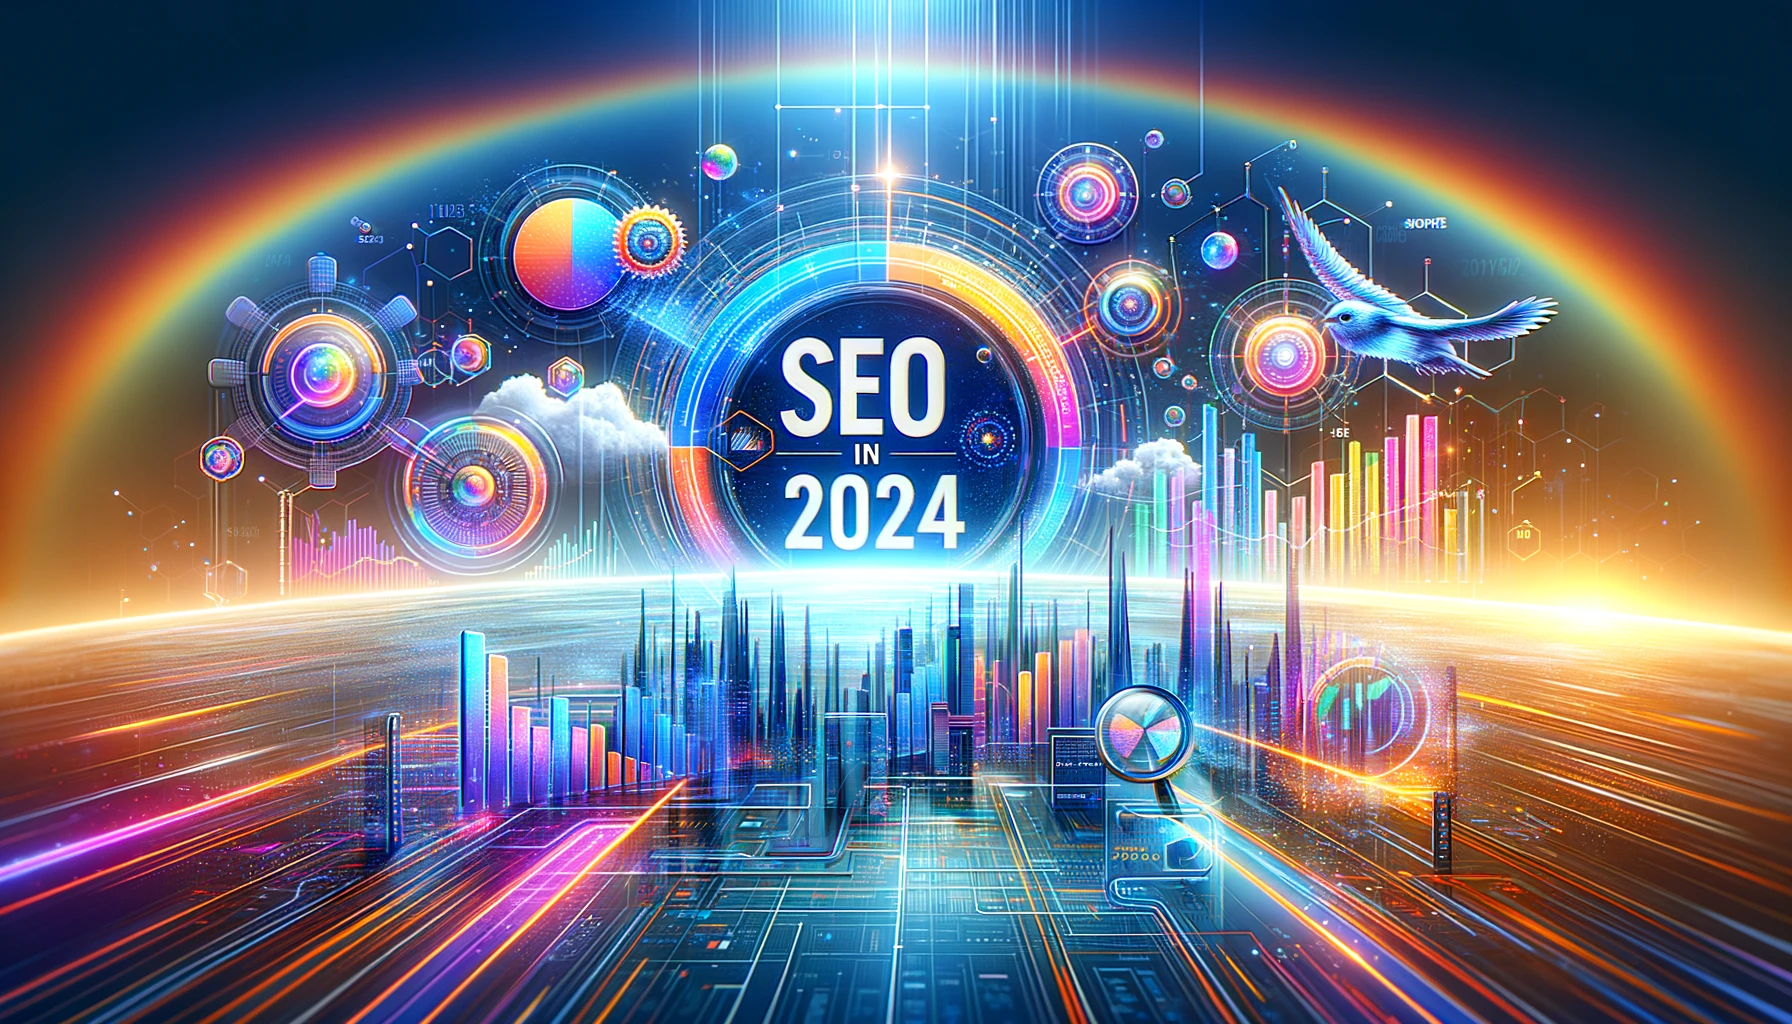 The Definitive Guide to Understanding SEO Value in 2024